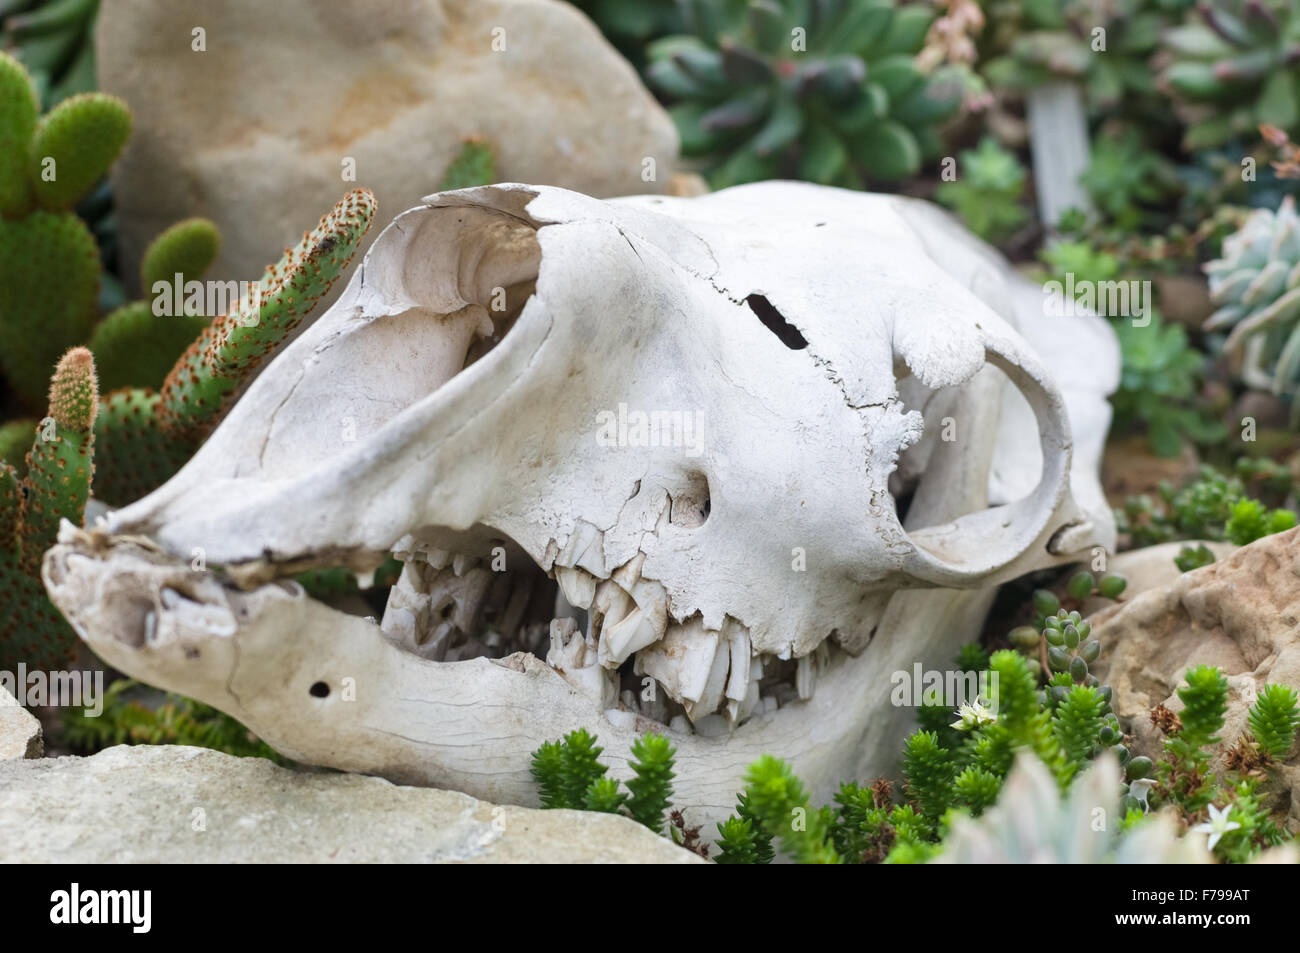 Skull on the ground near cactus and rocks, closeup view with selective focus Stock Photo